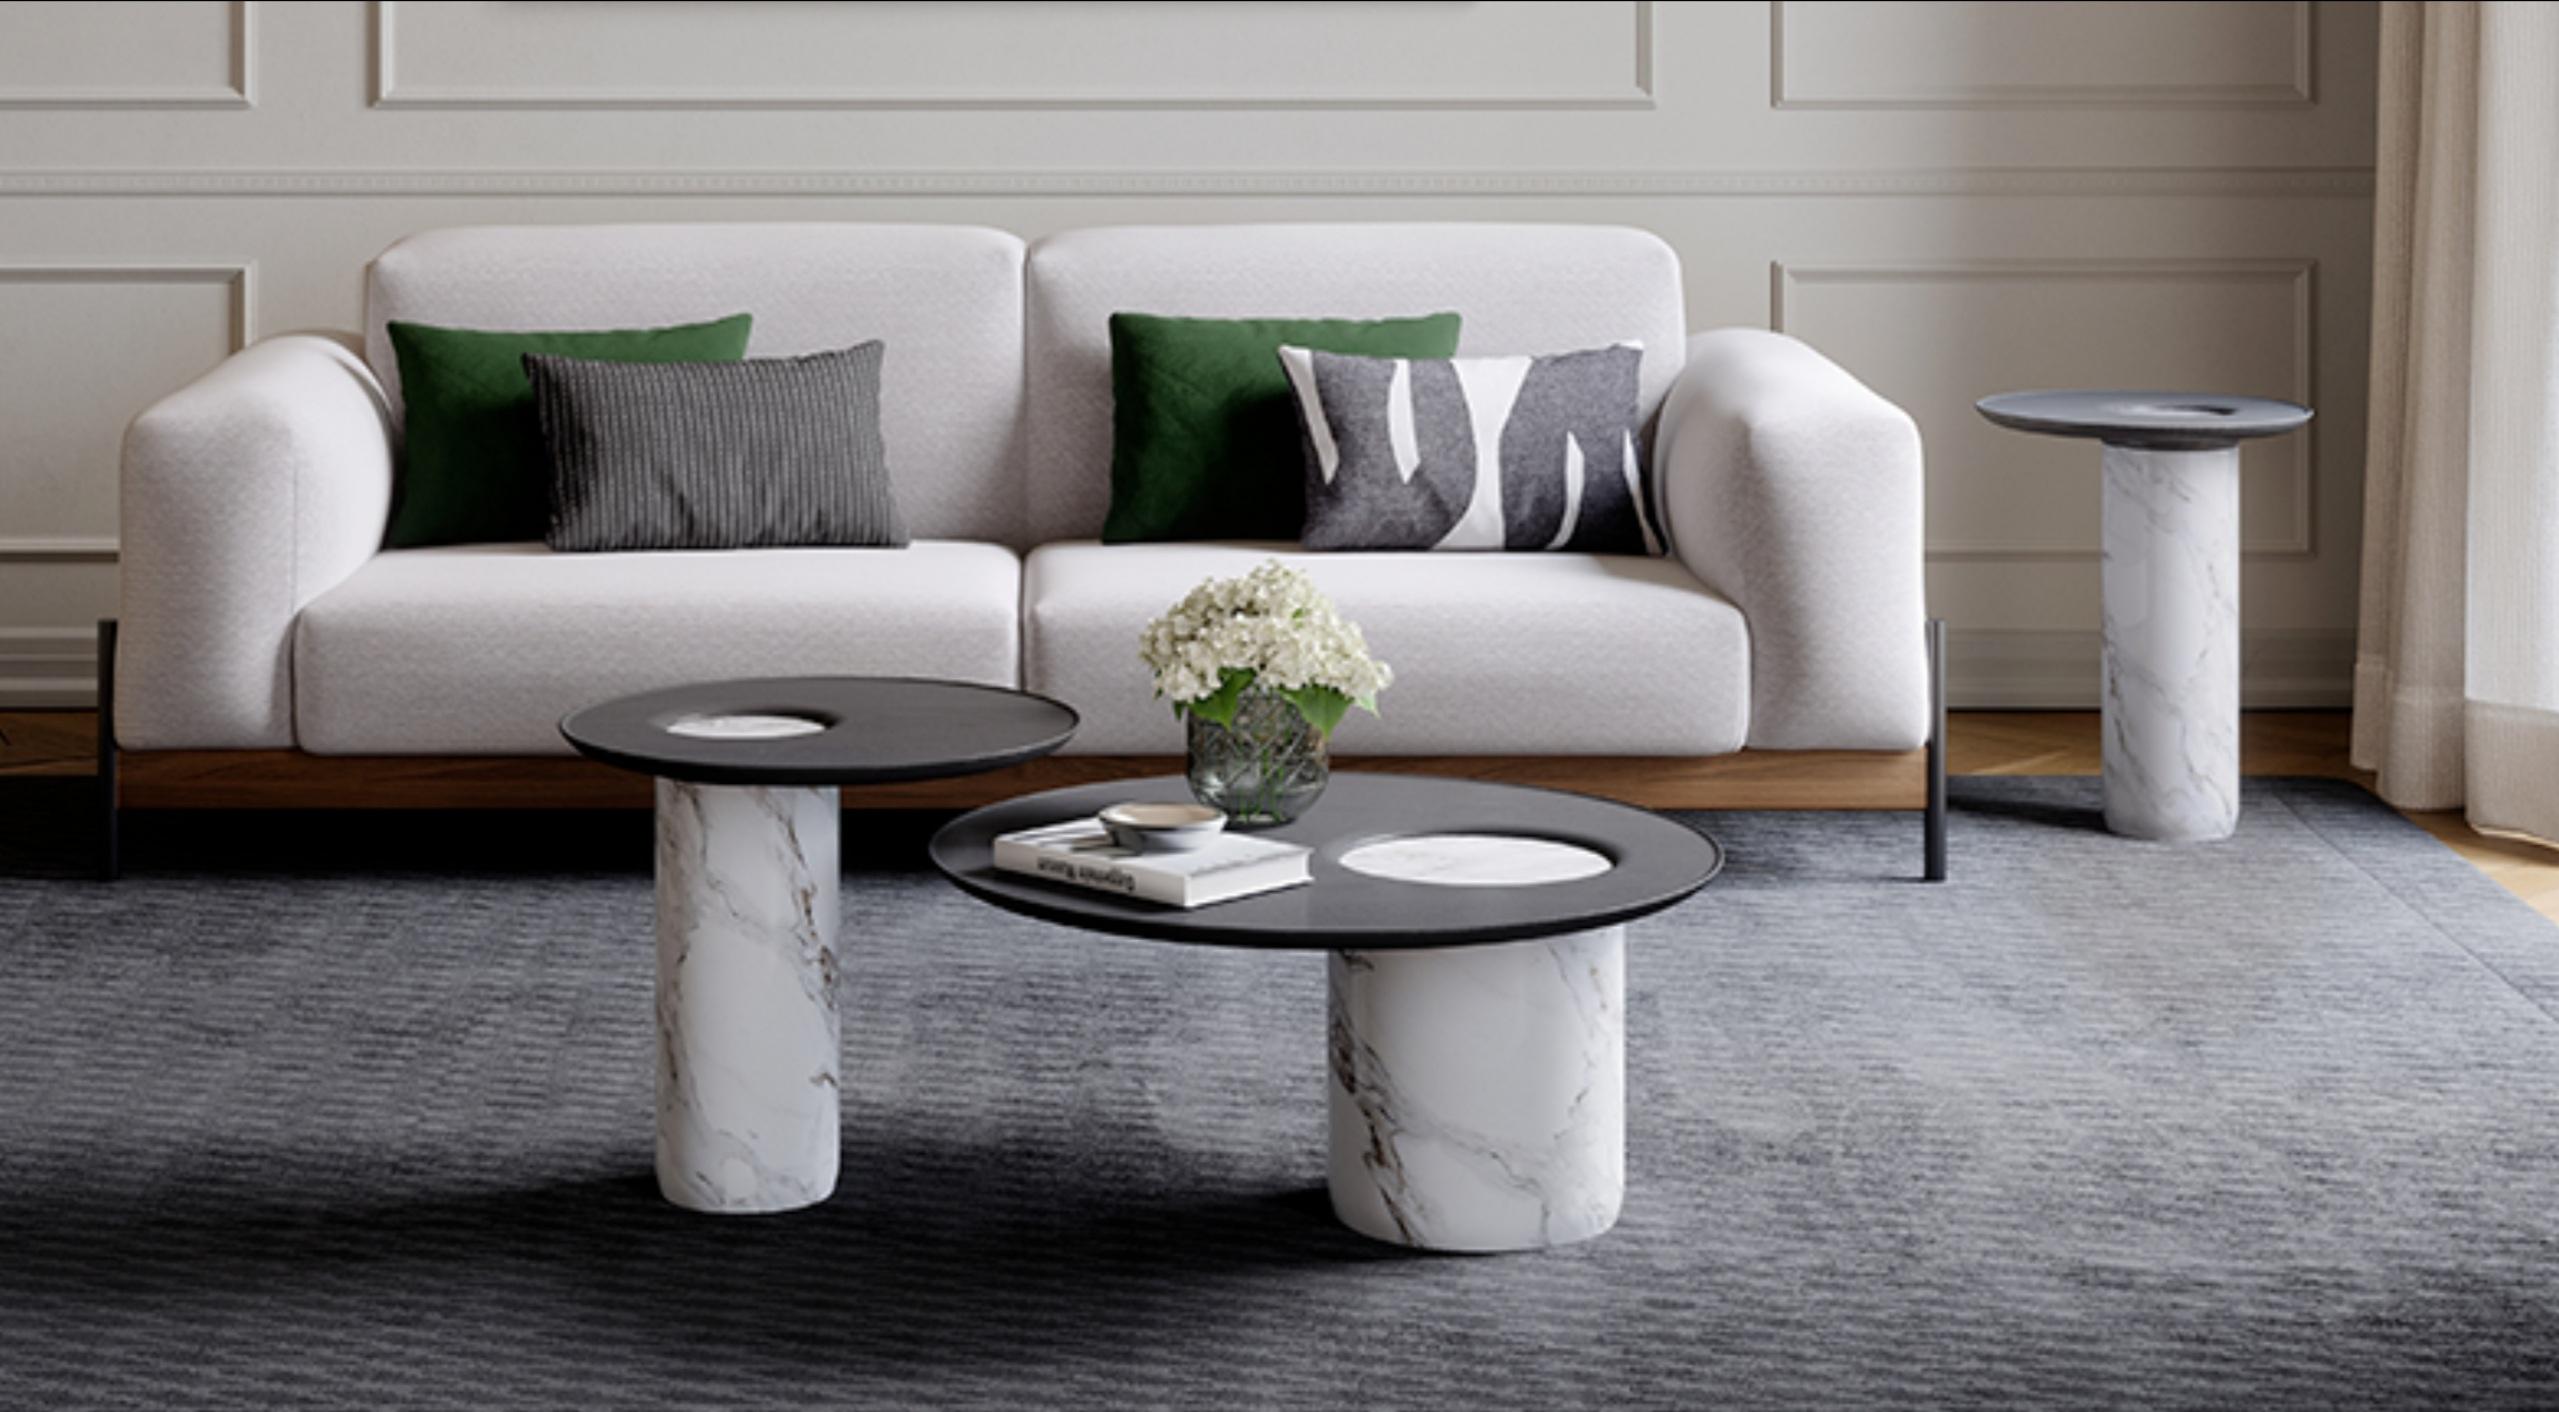 Beautiful Series of 3 sculptural design different sizes Coffee, Center or Side tables compose by a solid white Estremoz marble base and a delicate black wood top in Oak open pore.
These tables can be adapted to the look and feel of the space,